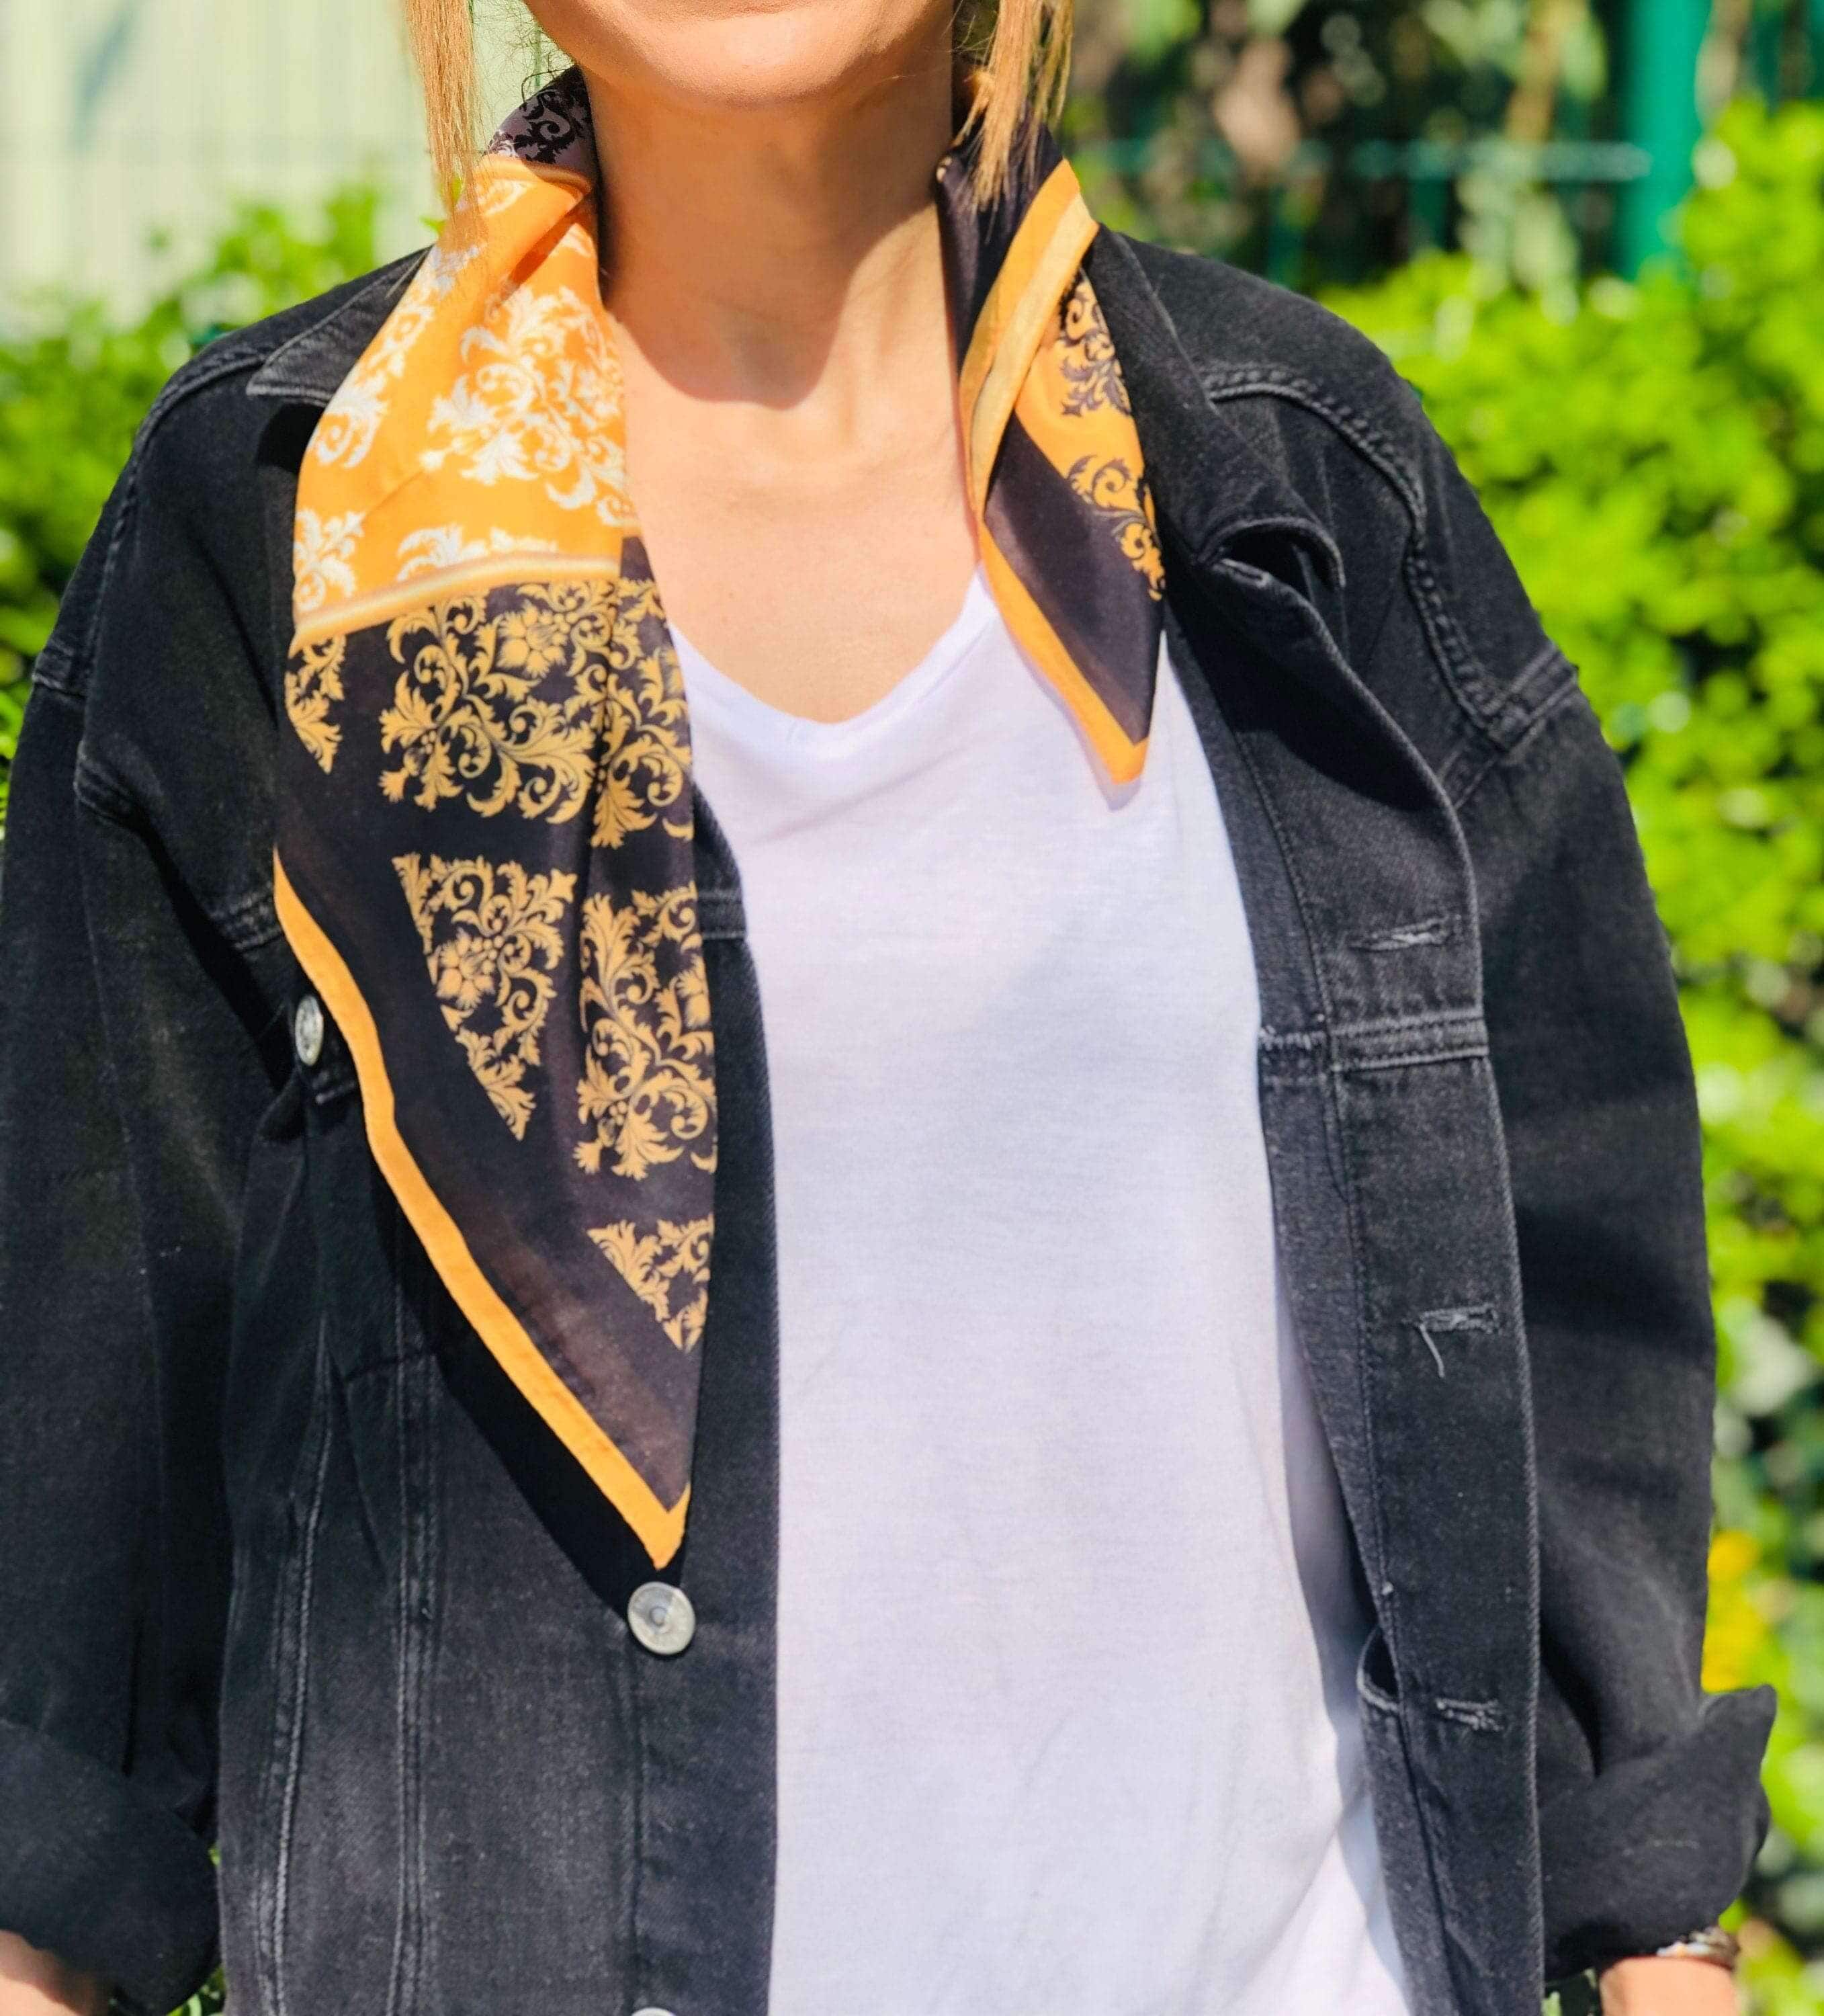 Silk Blend Scarf: Elevate your outfit with this luxurious silk blend scarf. The delicate fabric will feel soft against your skin and add a touch of elegance to any look.